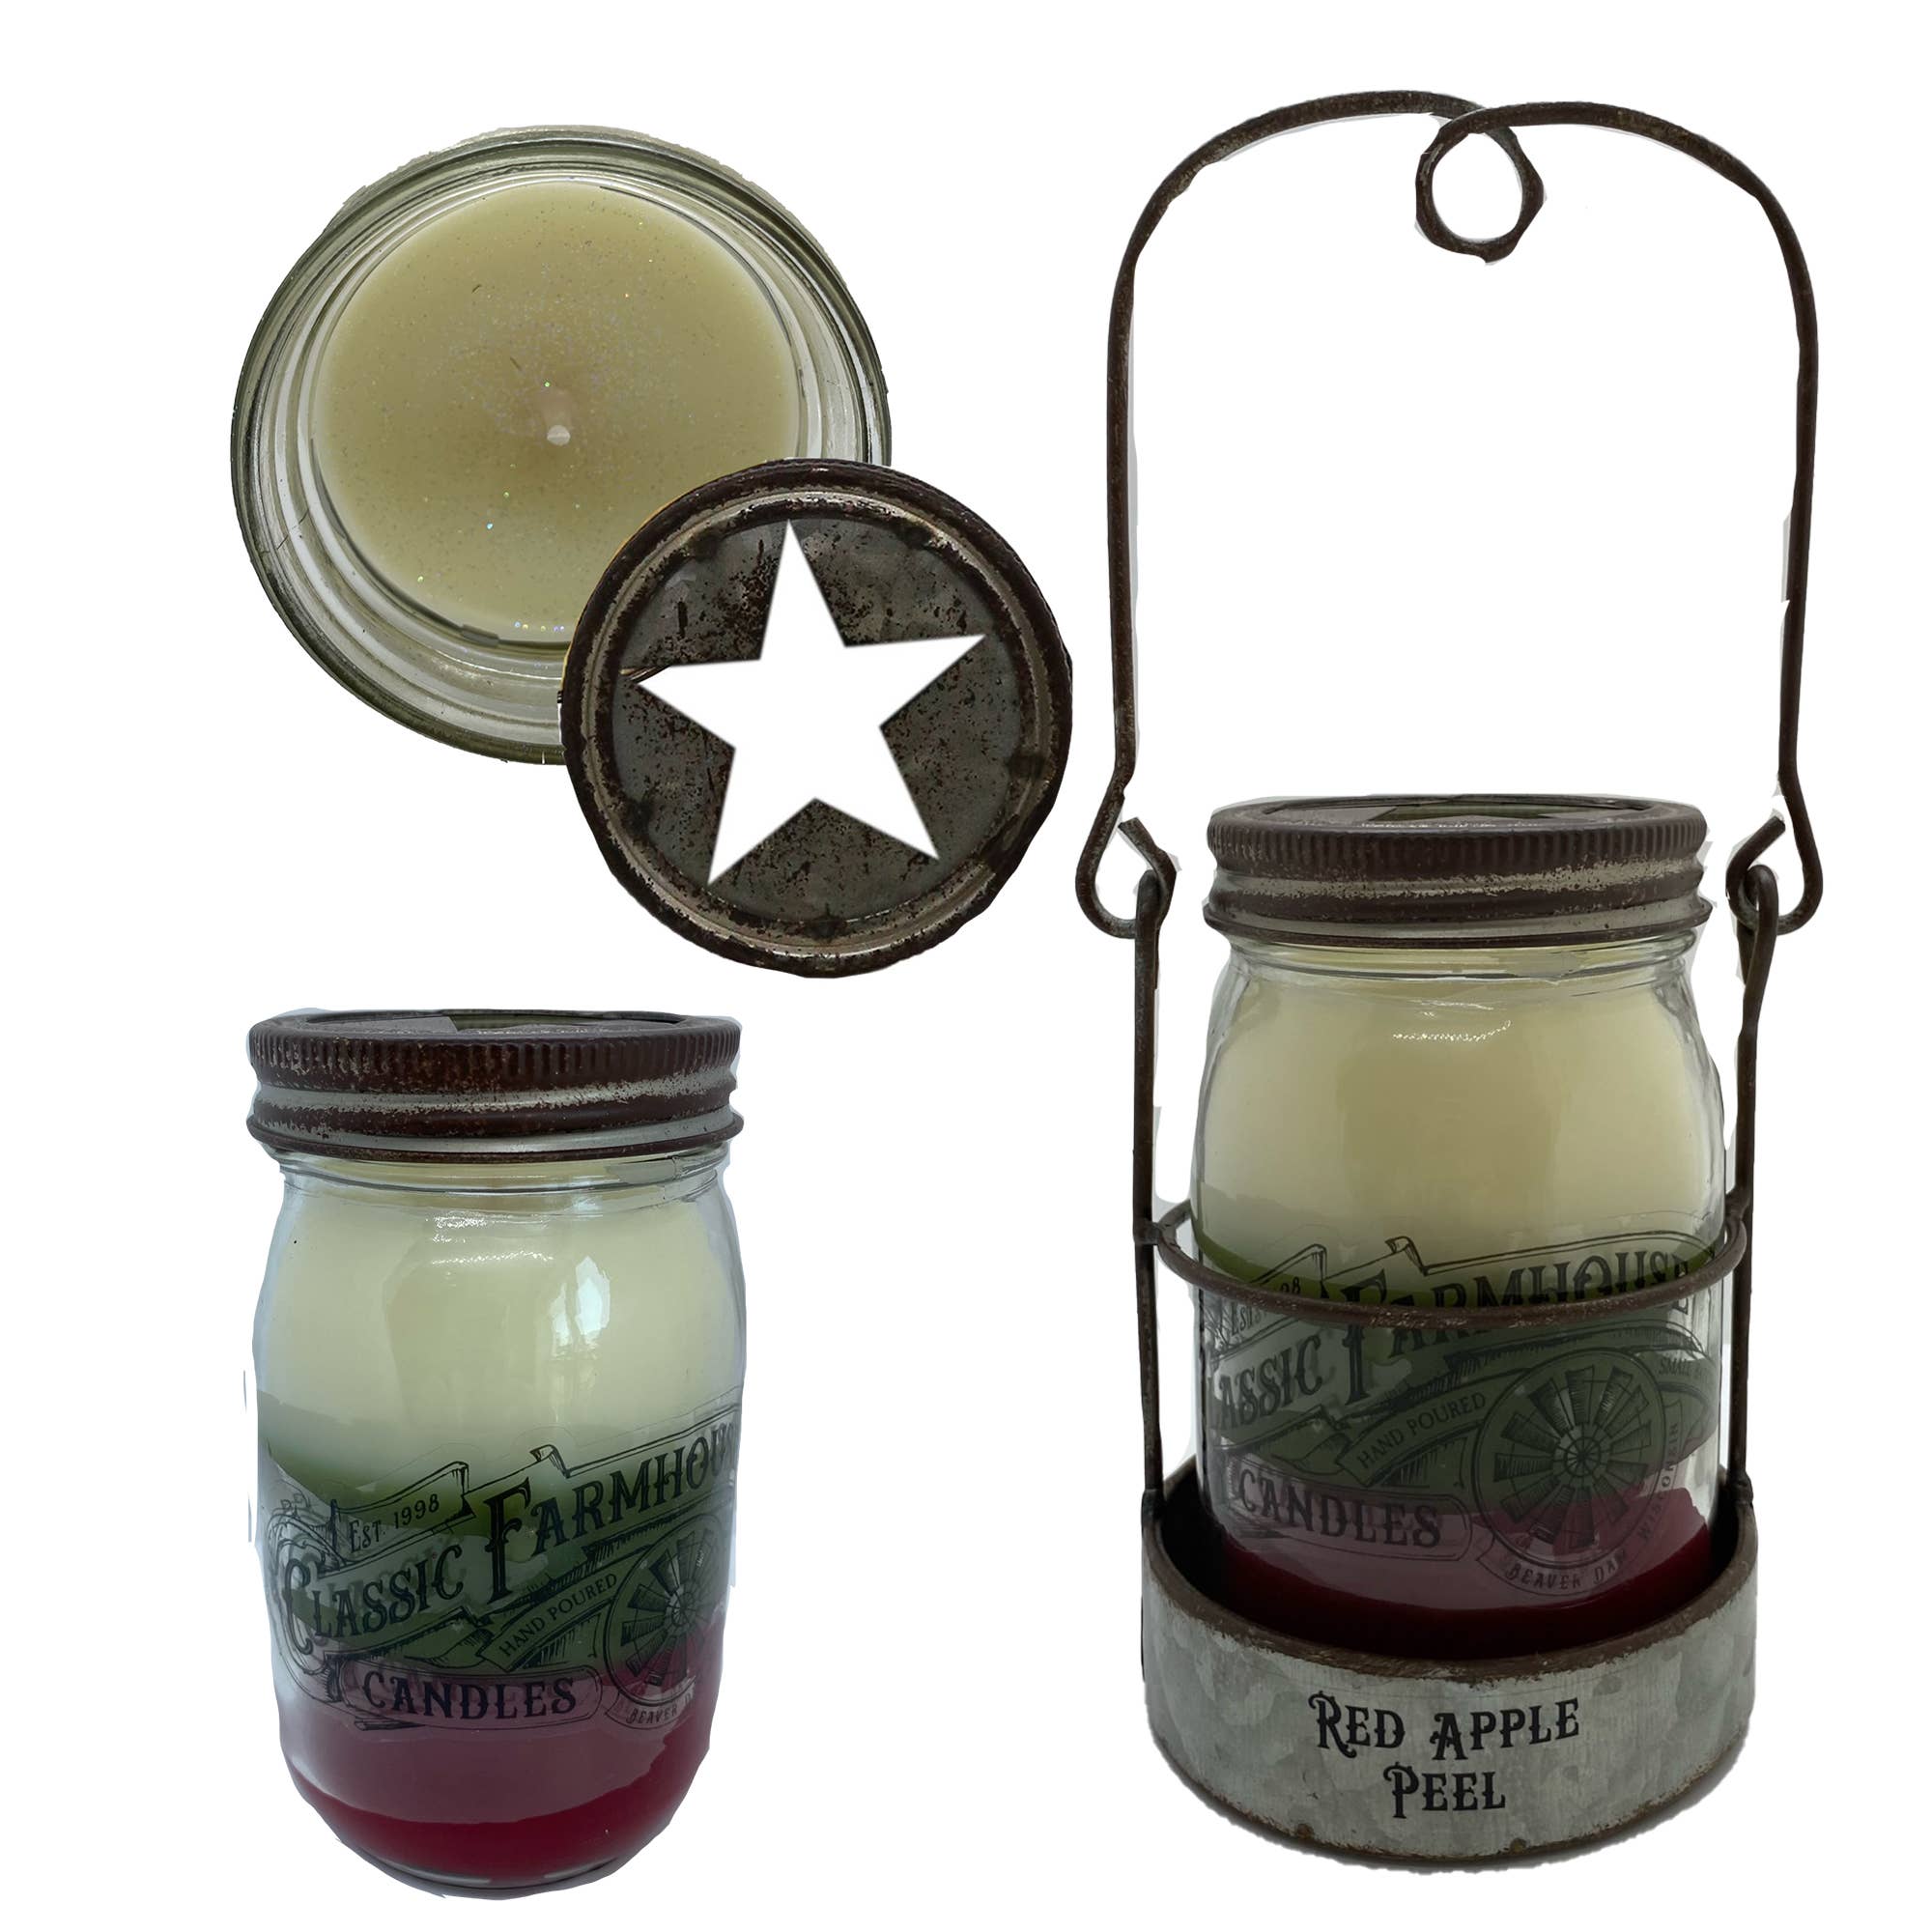 RED APPLE PEEL - Classic Farmhouse Candles